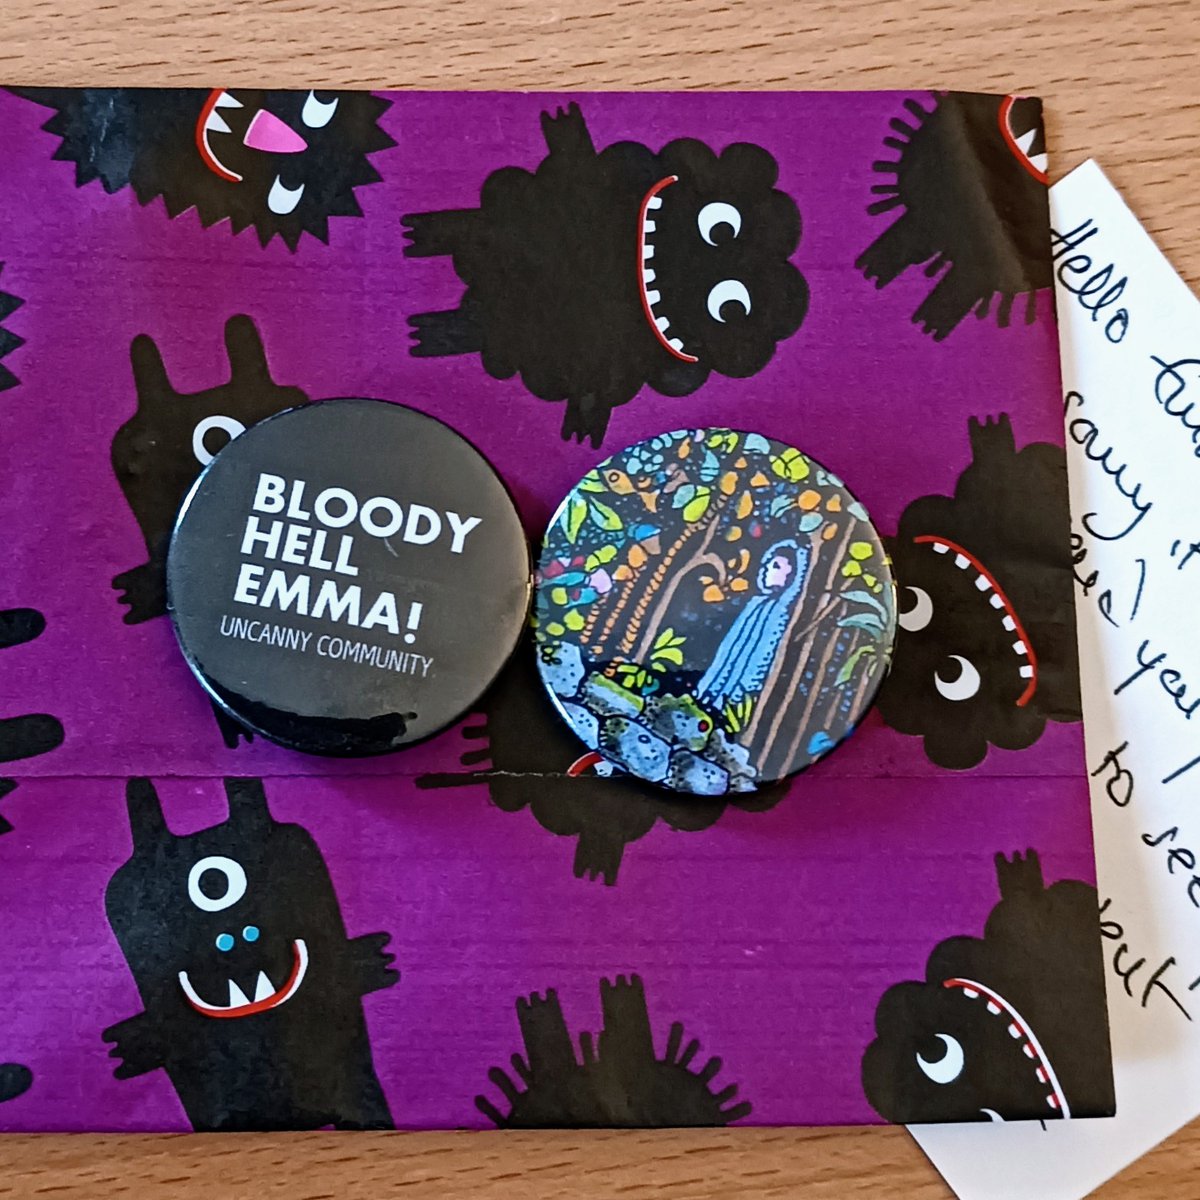 Bloody hell @Jennillumijen! Thanks everso much for the #UncannyCommunity badge. I will wear it with pride. You're a star! ❤️ #BloodyHellKen